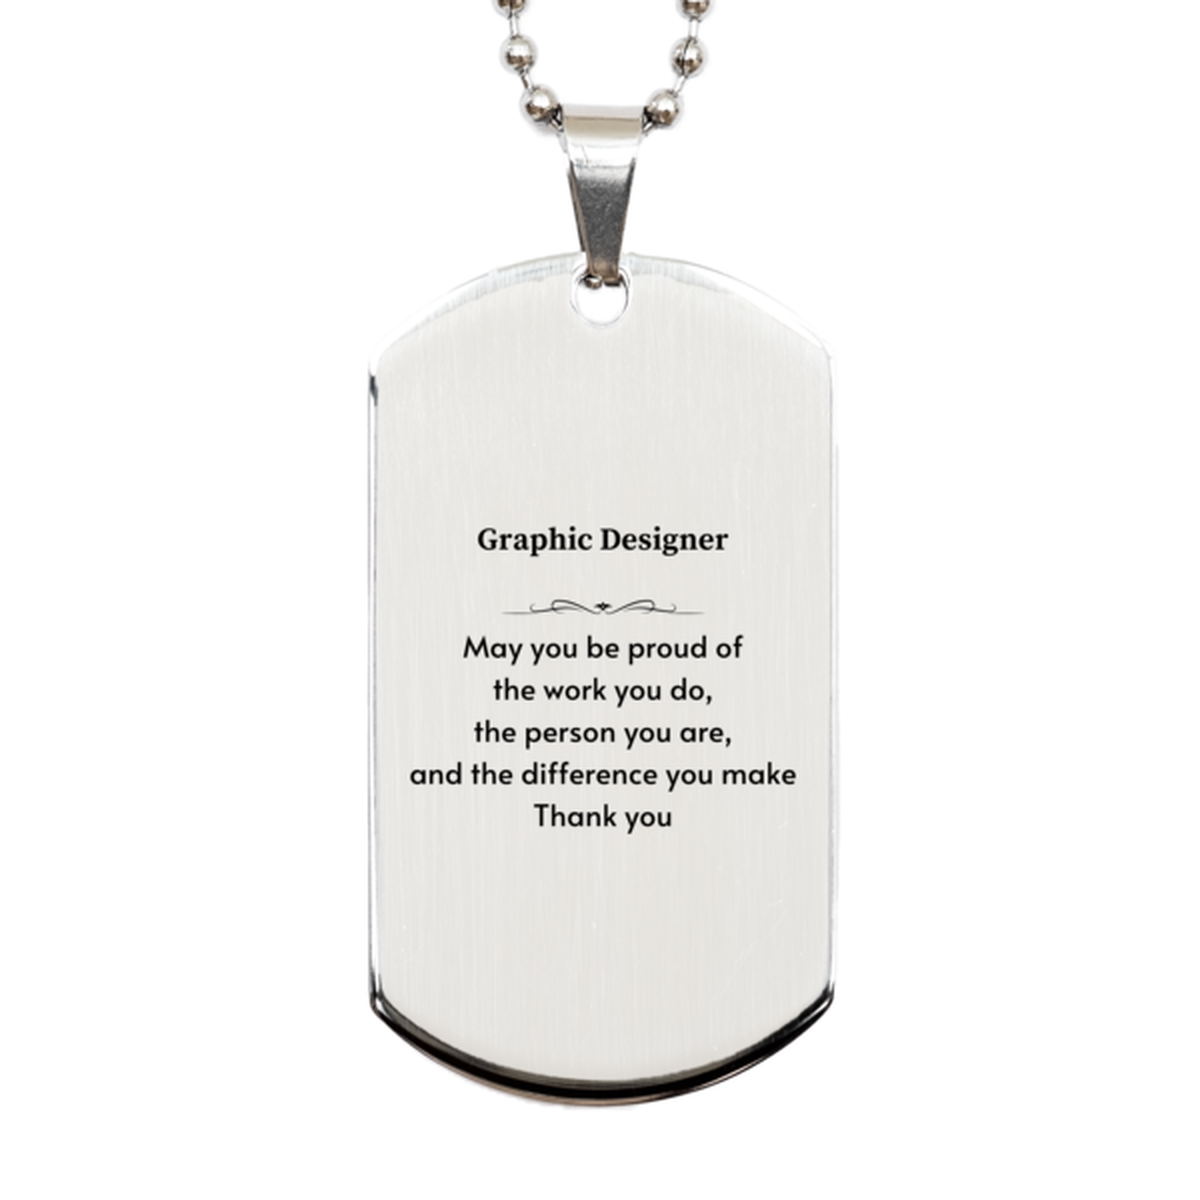 Heartwarming Silver Dog Tag Retirement Coworkers Gifts for Graphic Designer, Graphic Designer May You be proud of the work you do, the person you are Gifts for Boss Men Women Friends